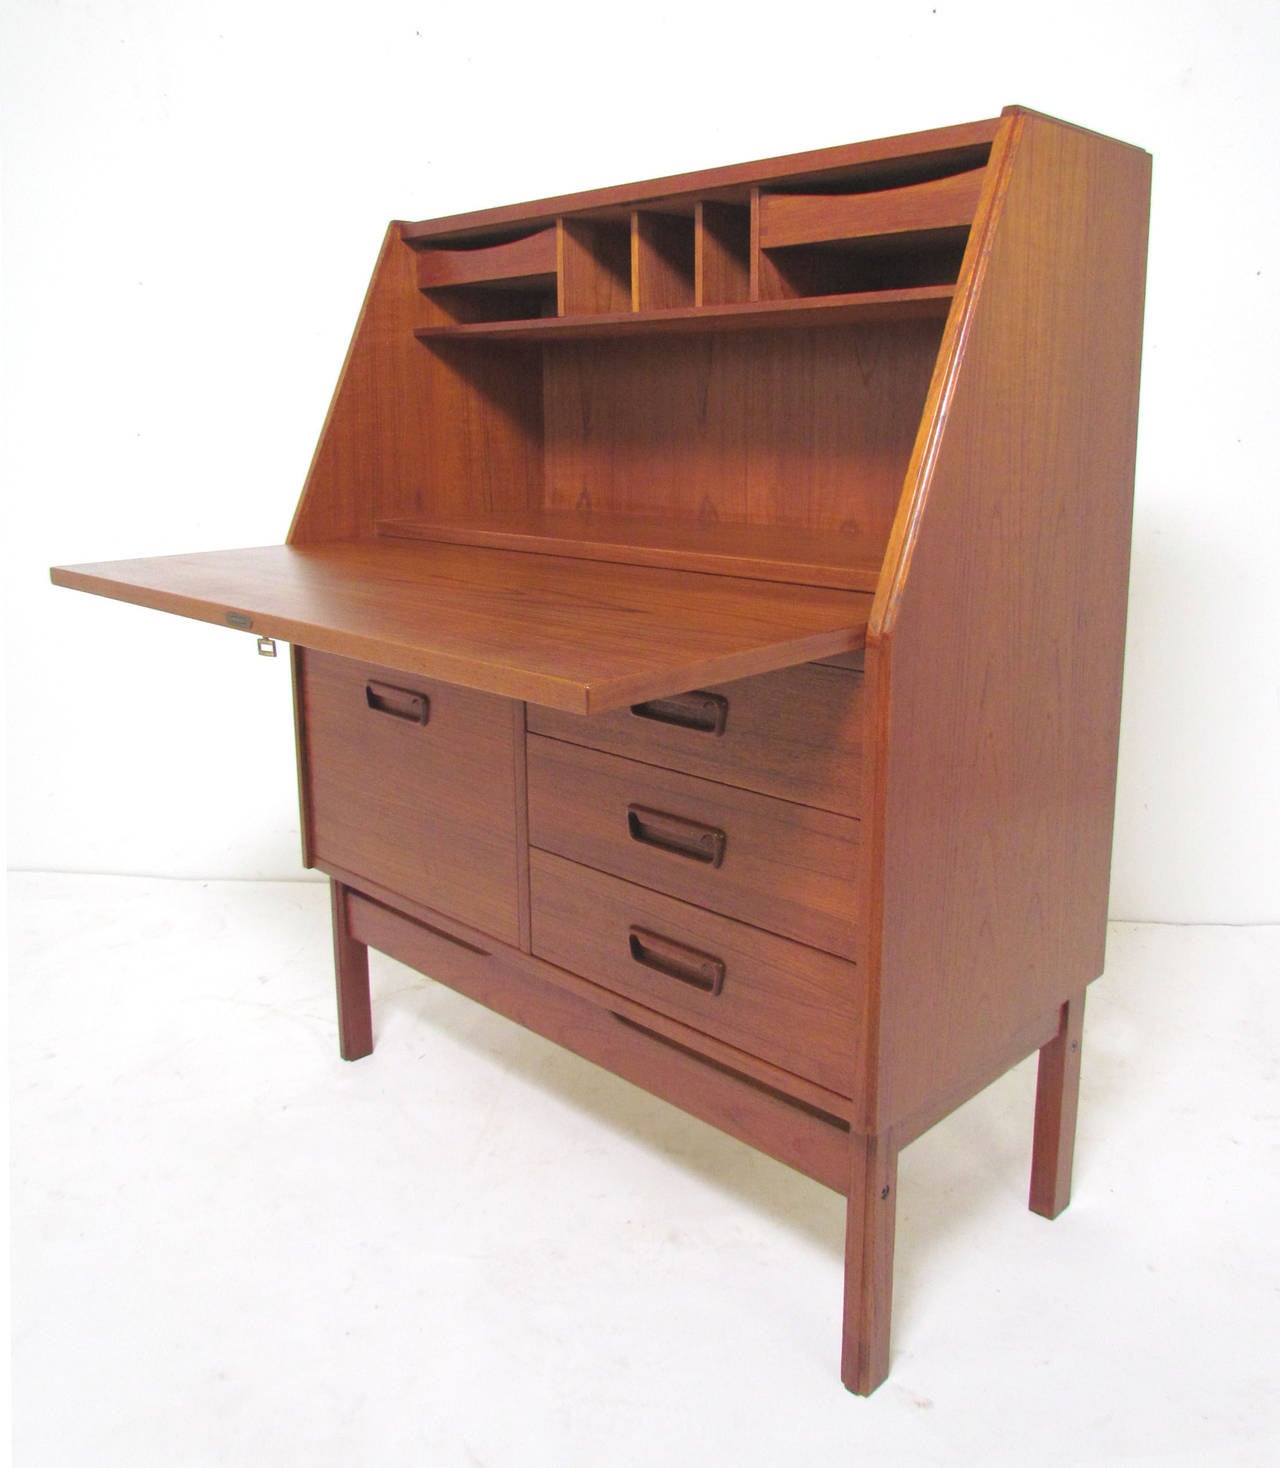 Low slant front teak secretary desk by Dyrlund, made in Denmark, circa 1960s. Interior features shelving and shallow drawers for storage. Below the desk surface there are four drawers including one deeper one for files.

Measures: 16.5